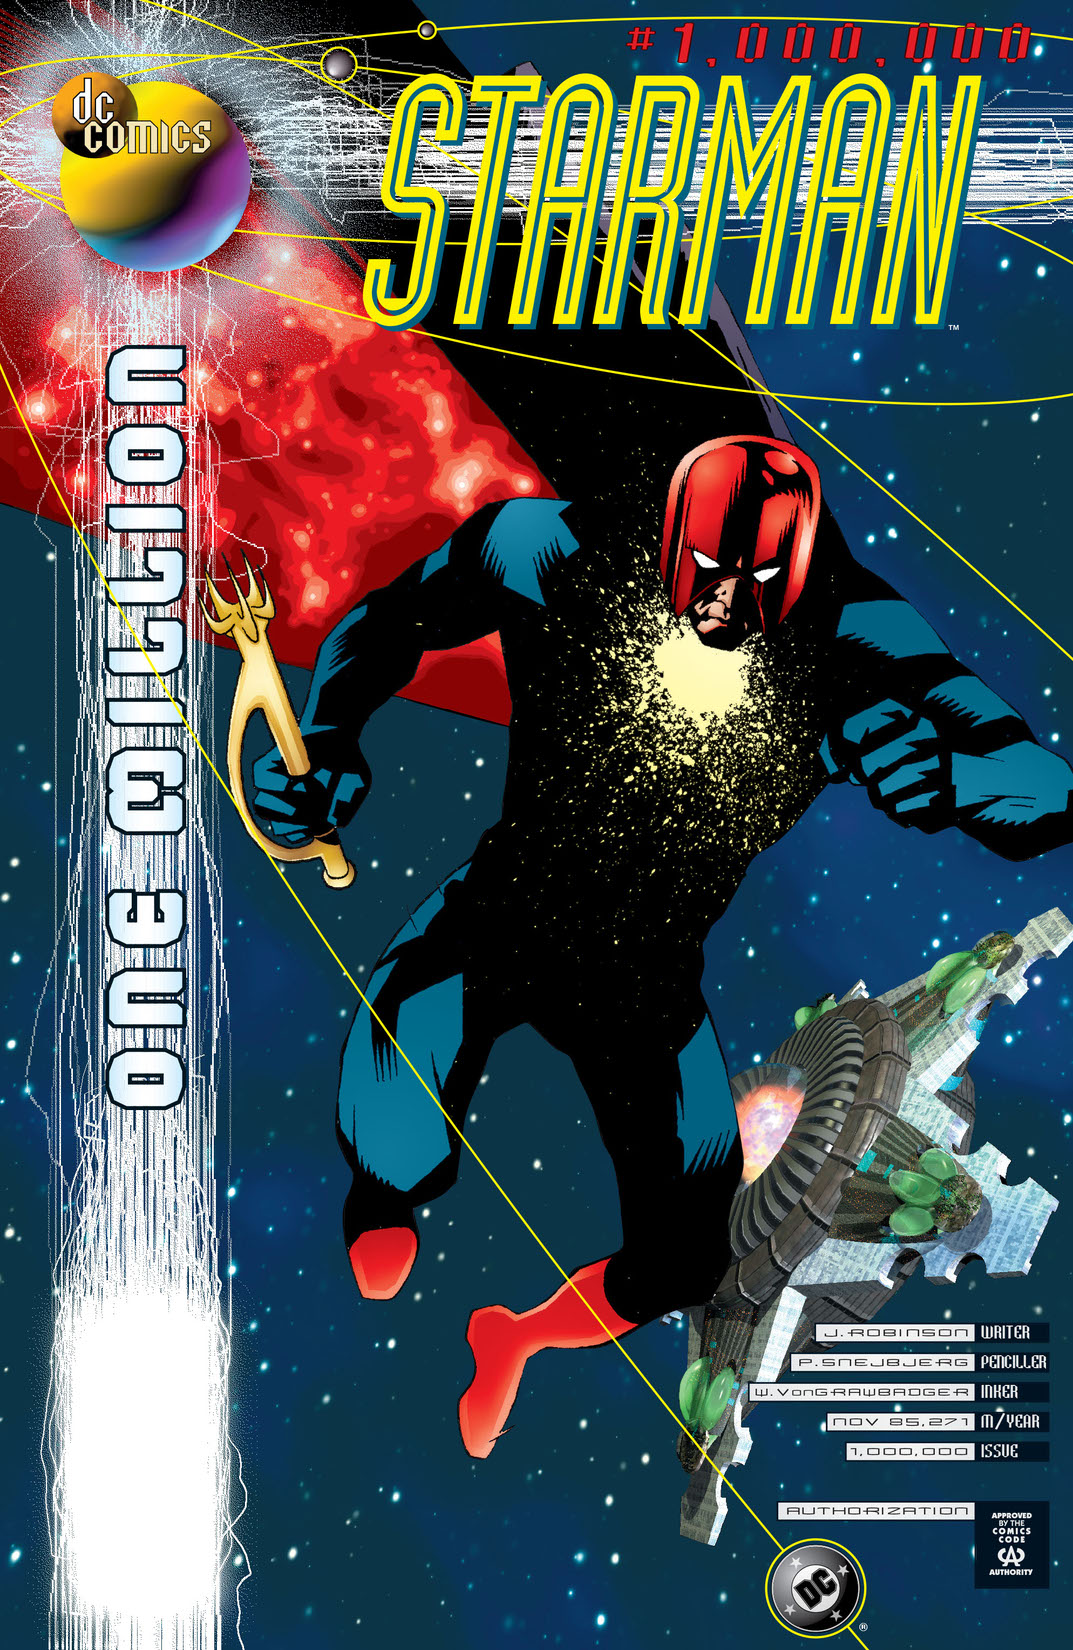 Starman #1000000 preview images